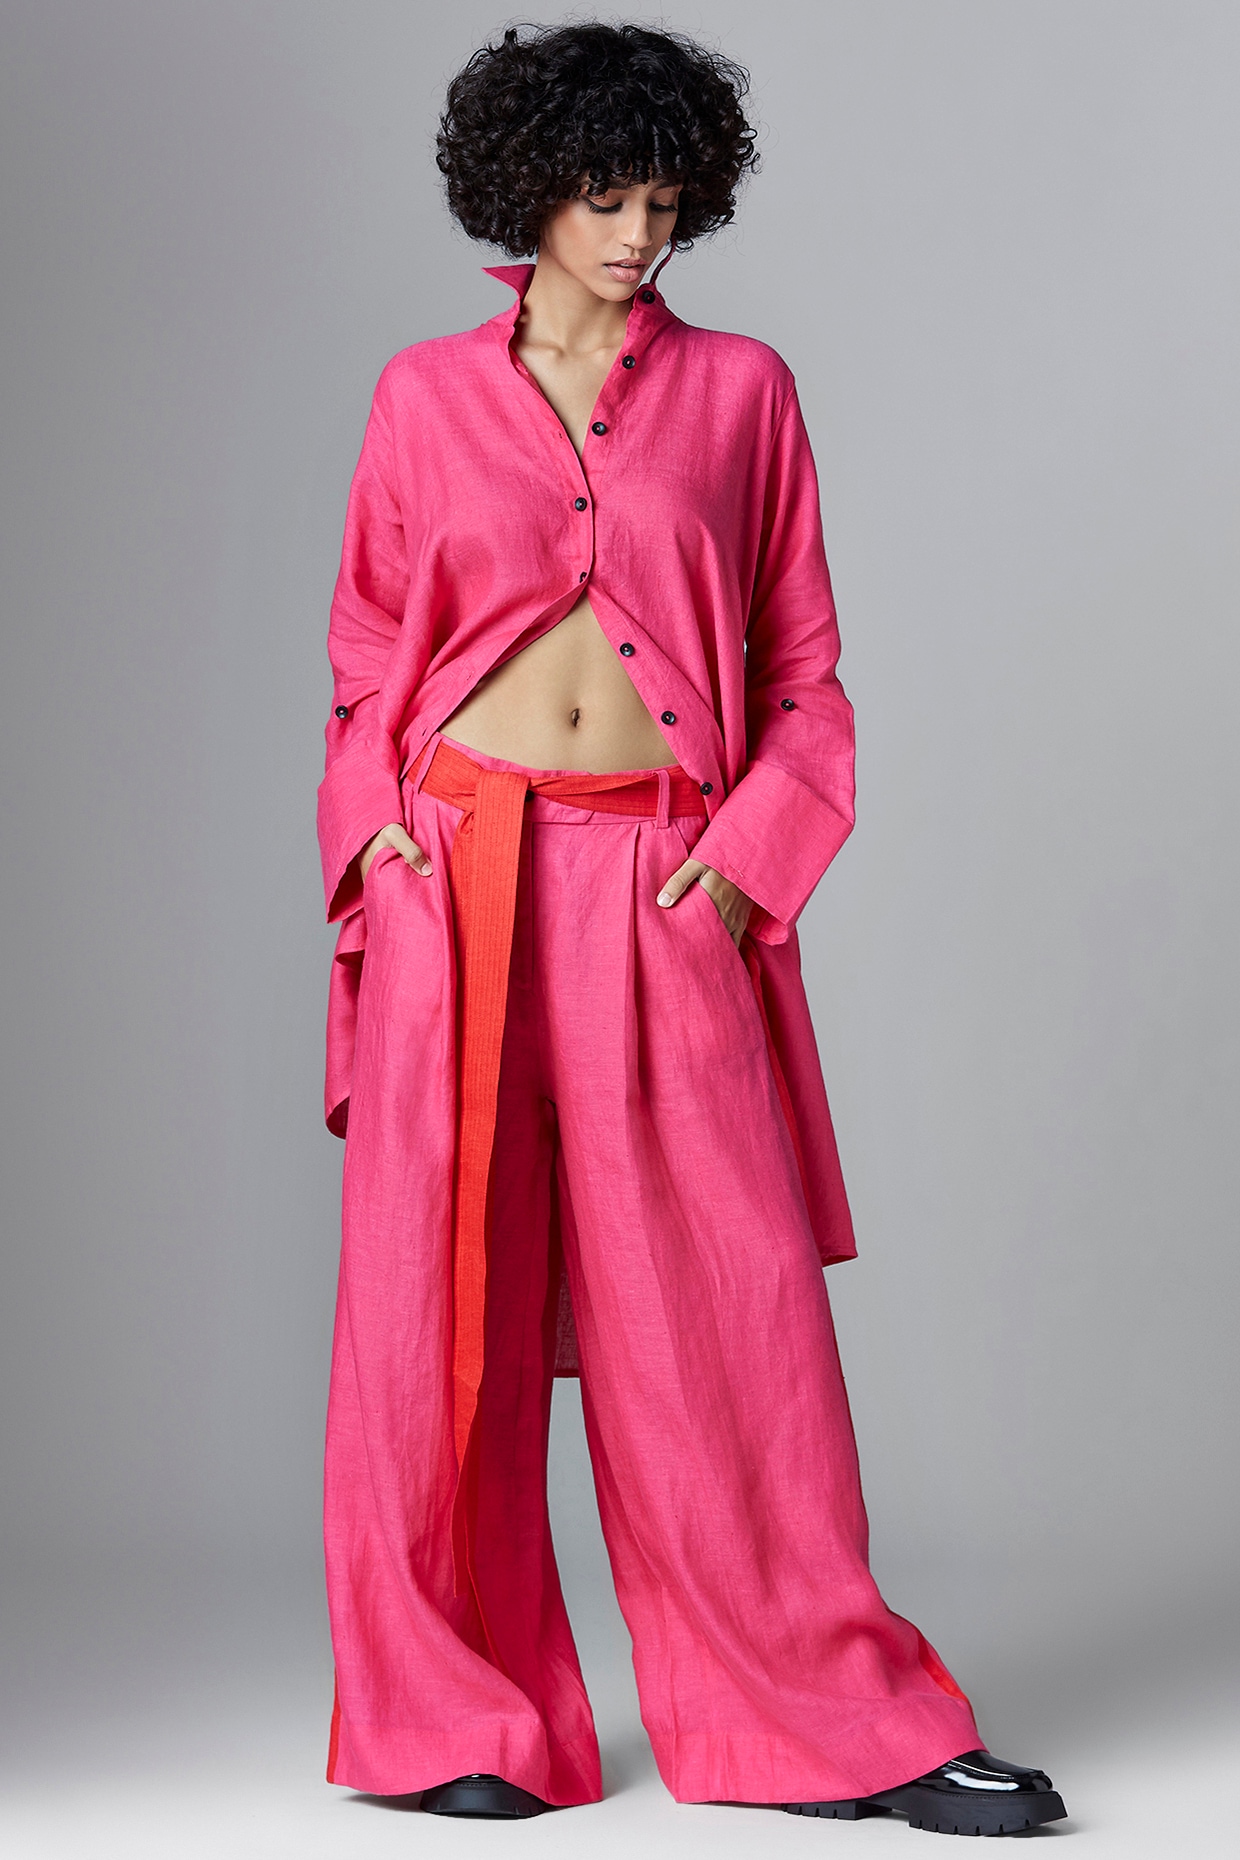 Bright Pink Linen Blend Formal Wide Leg Trousers  New Look